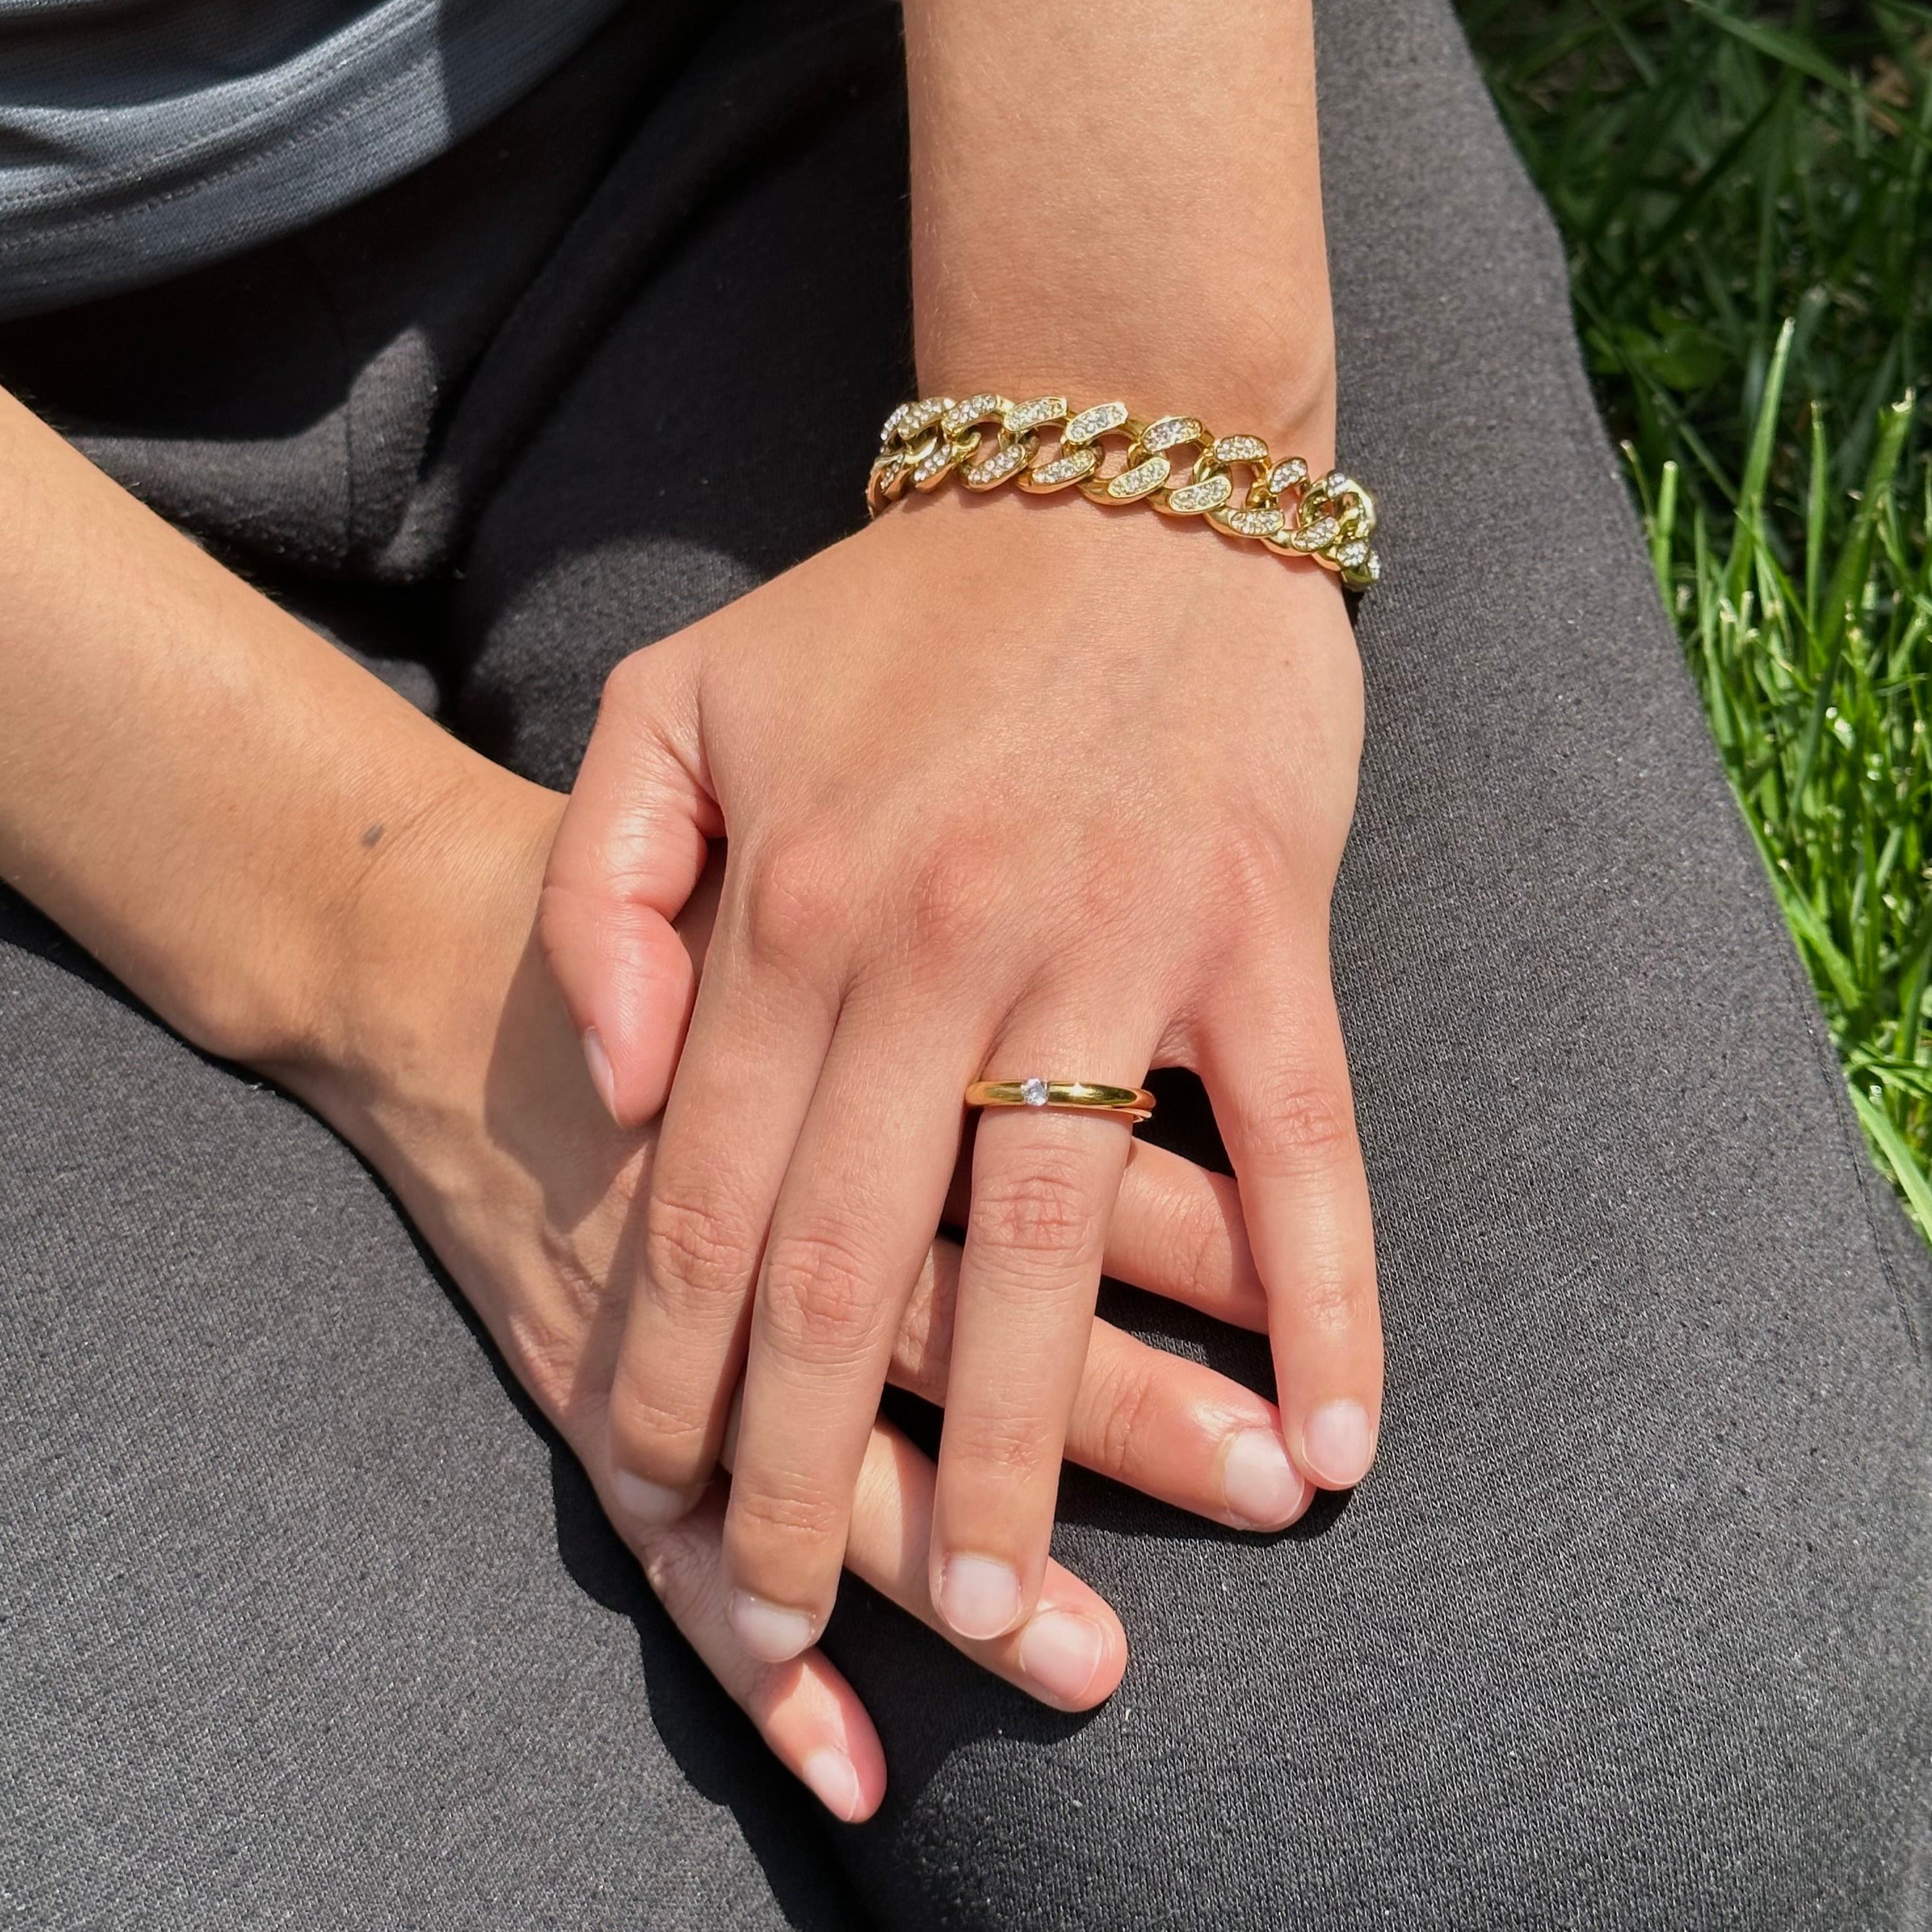 gold iced out bracelet and solitaire ring